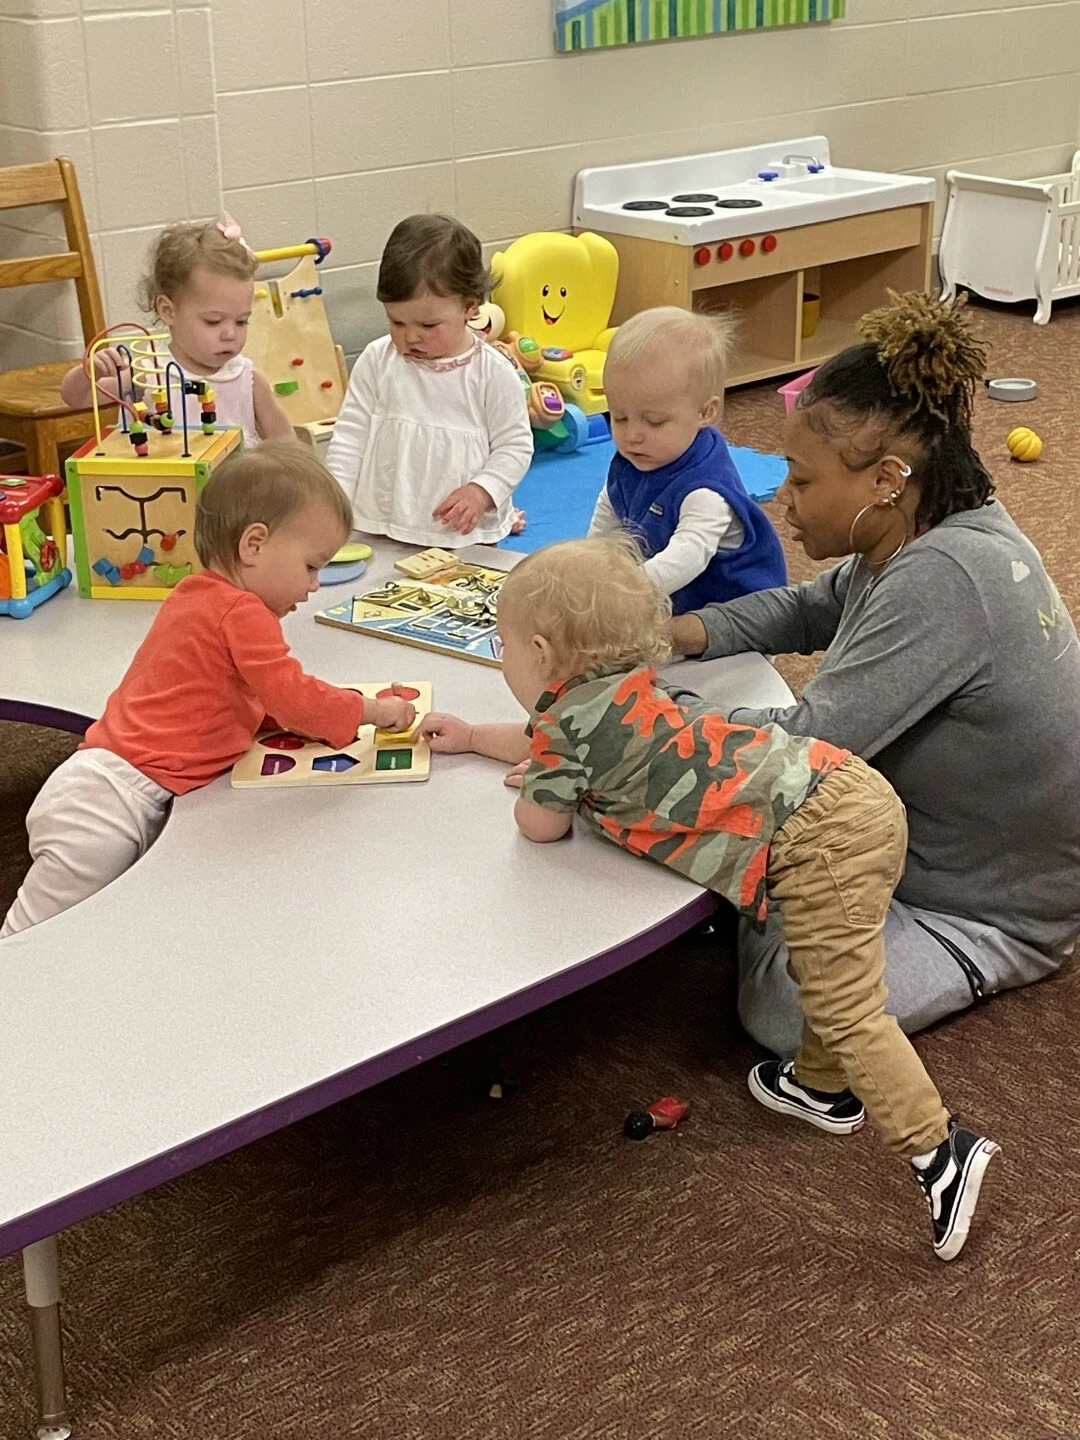 a person and several children playing with toys on a table